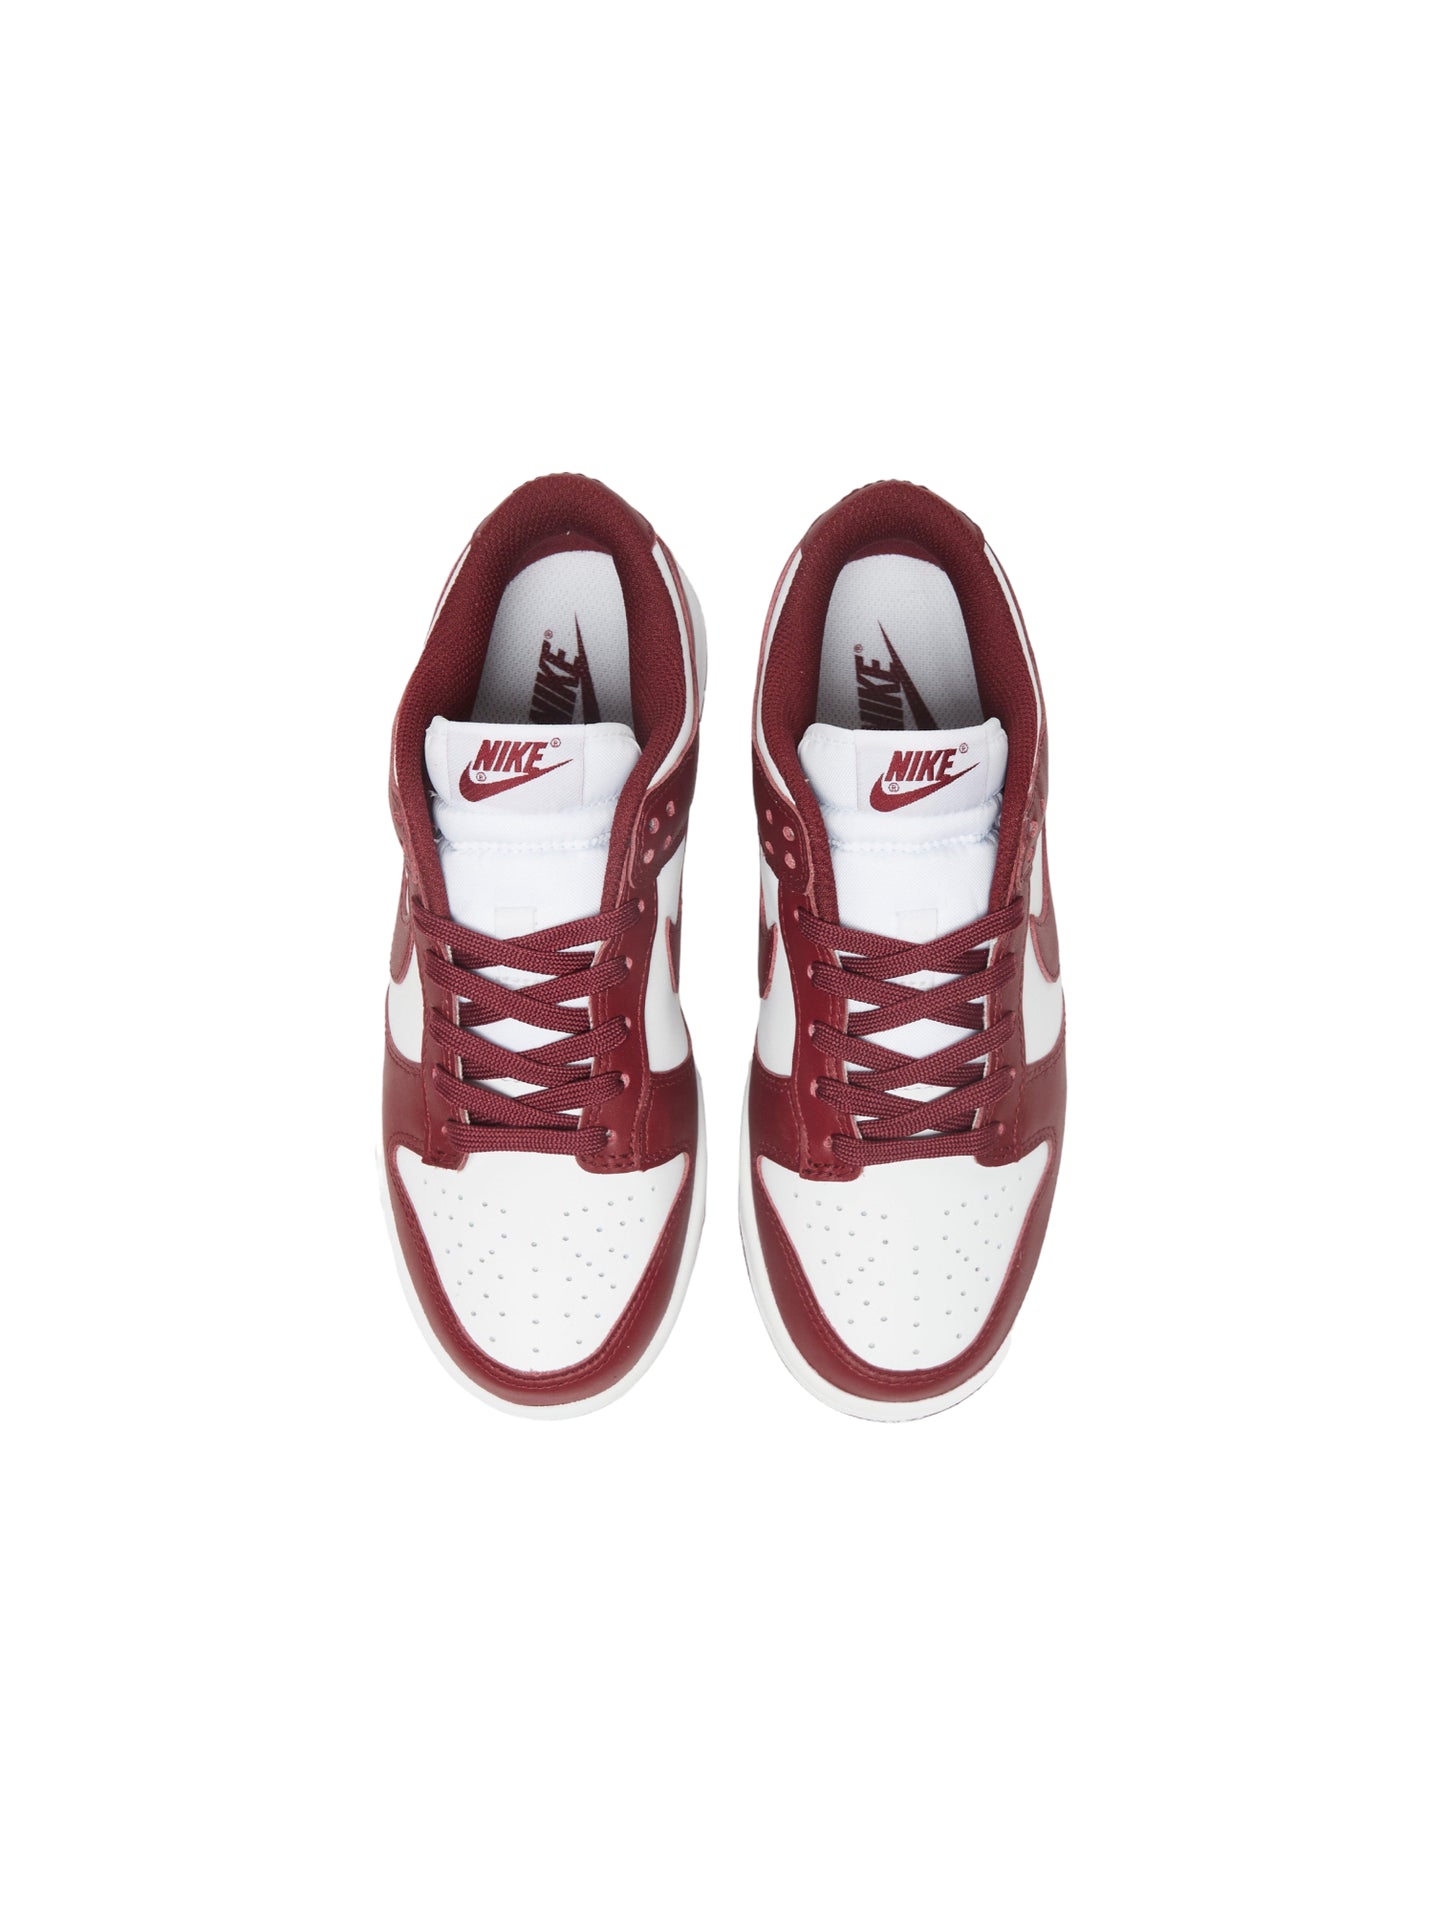 Nike Dunk Low Retro Team Red Sneakers